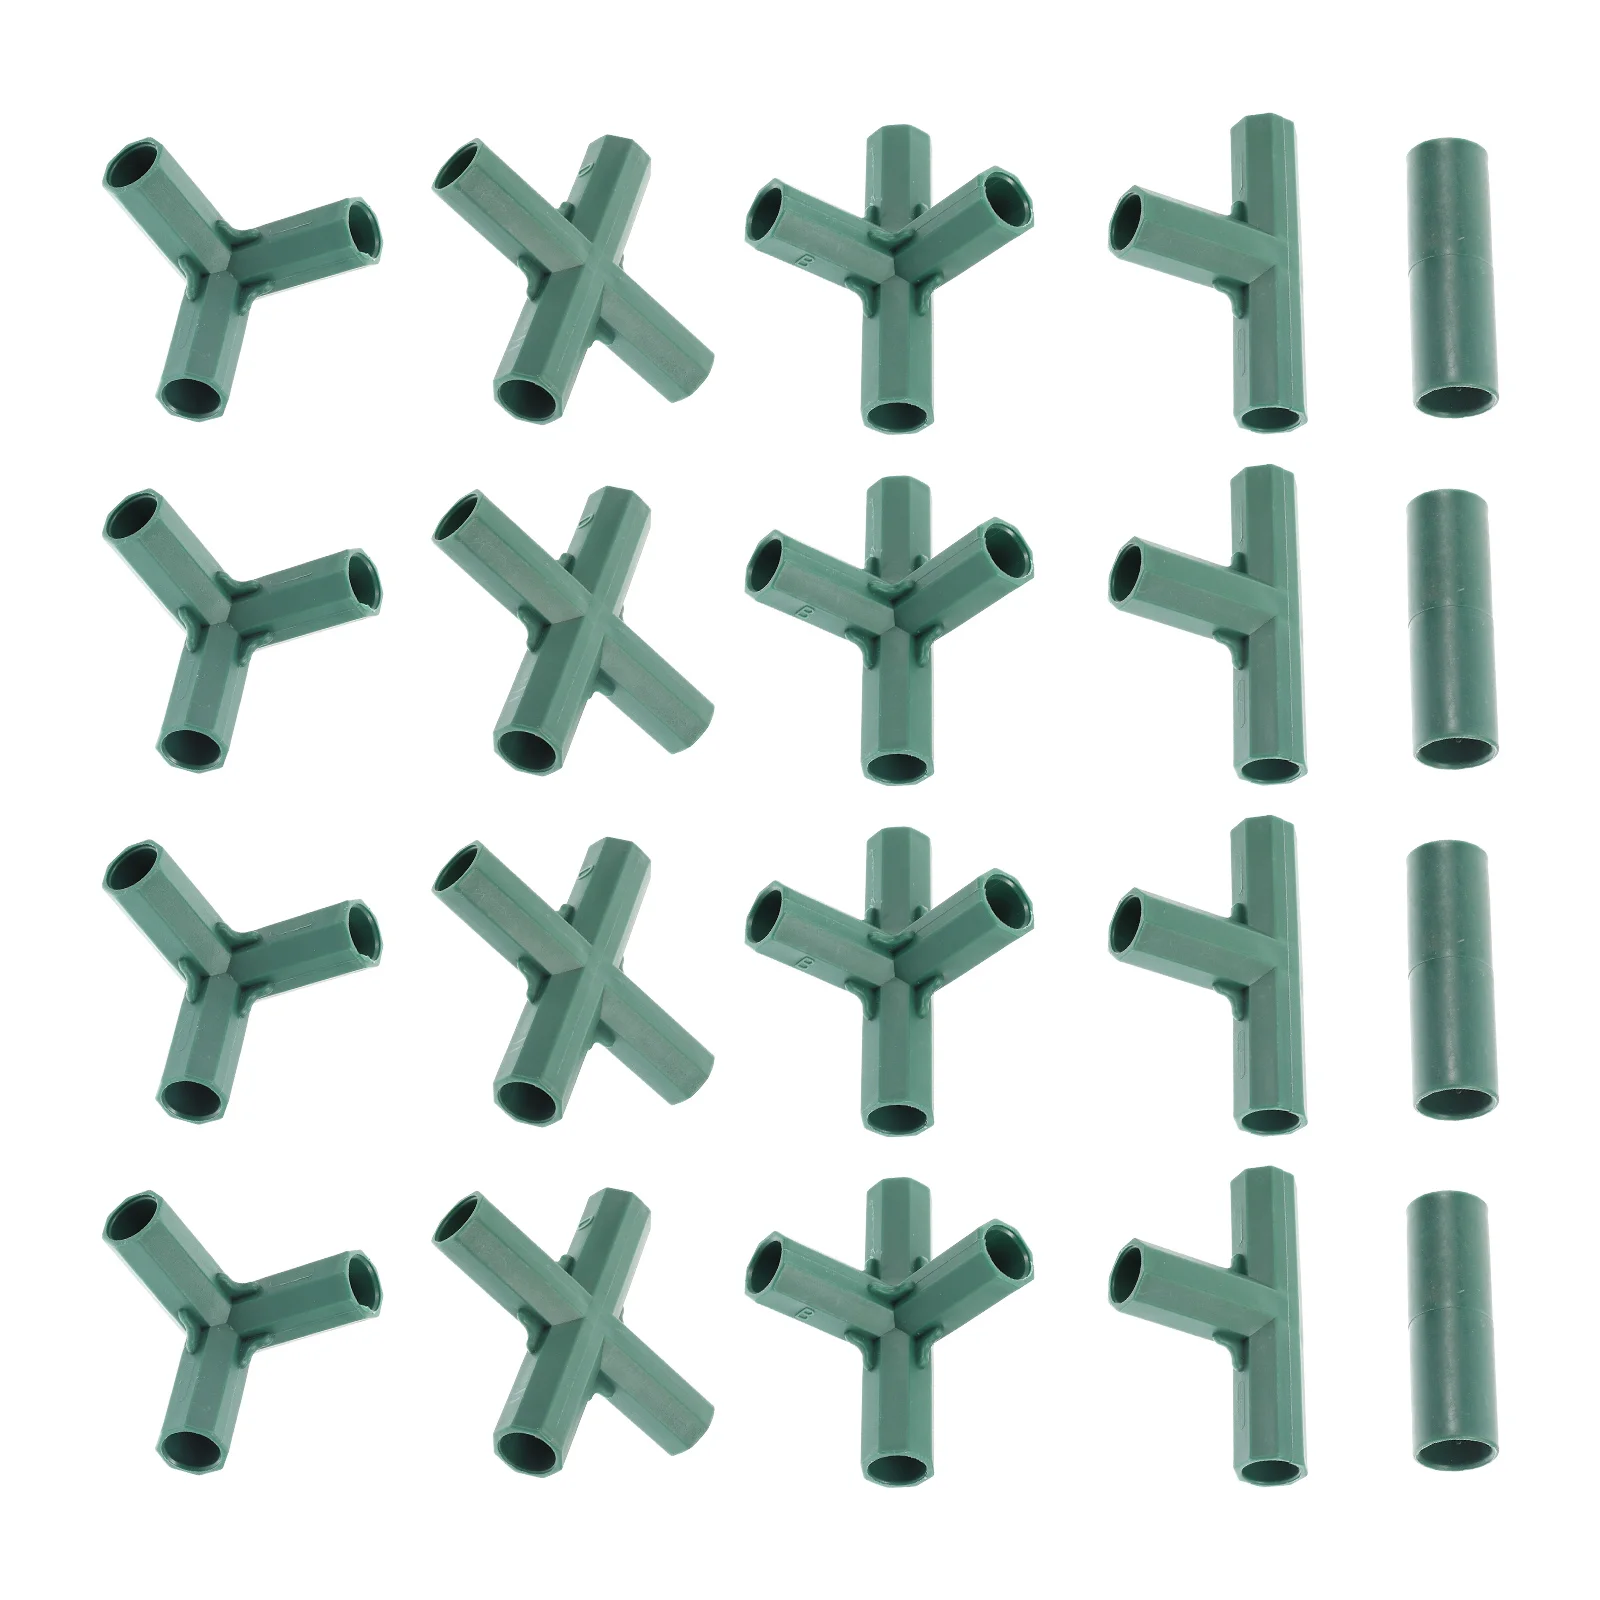 

20 Pcs Greenhouse Connector Gardening Tools Plastic Stand Planting Pipe Joints Brackets Pillar Stakes Trellis Accessories